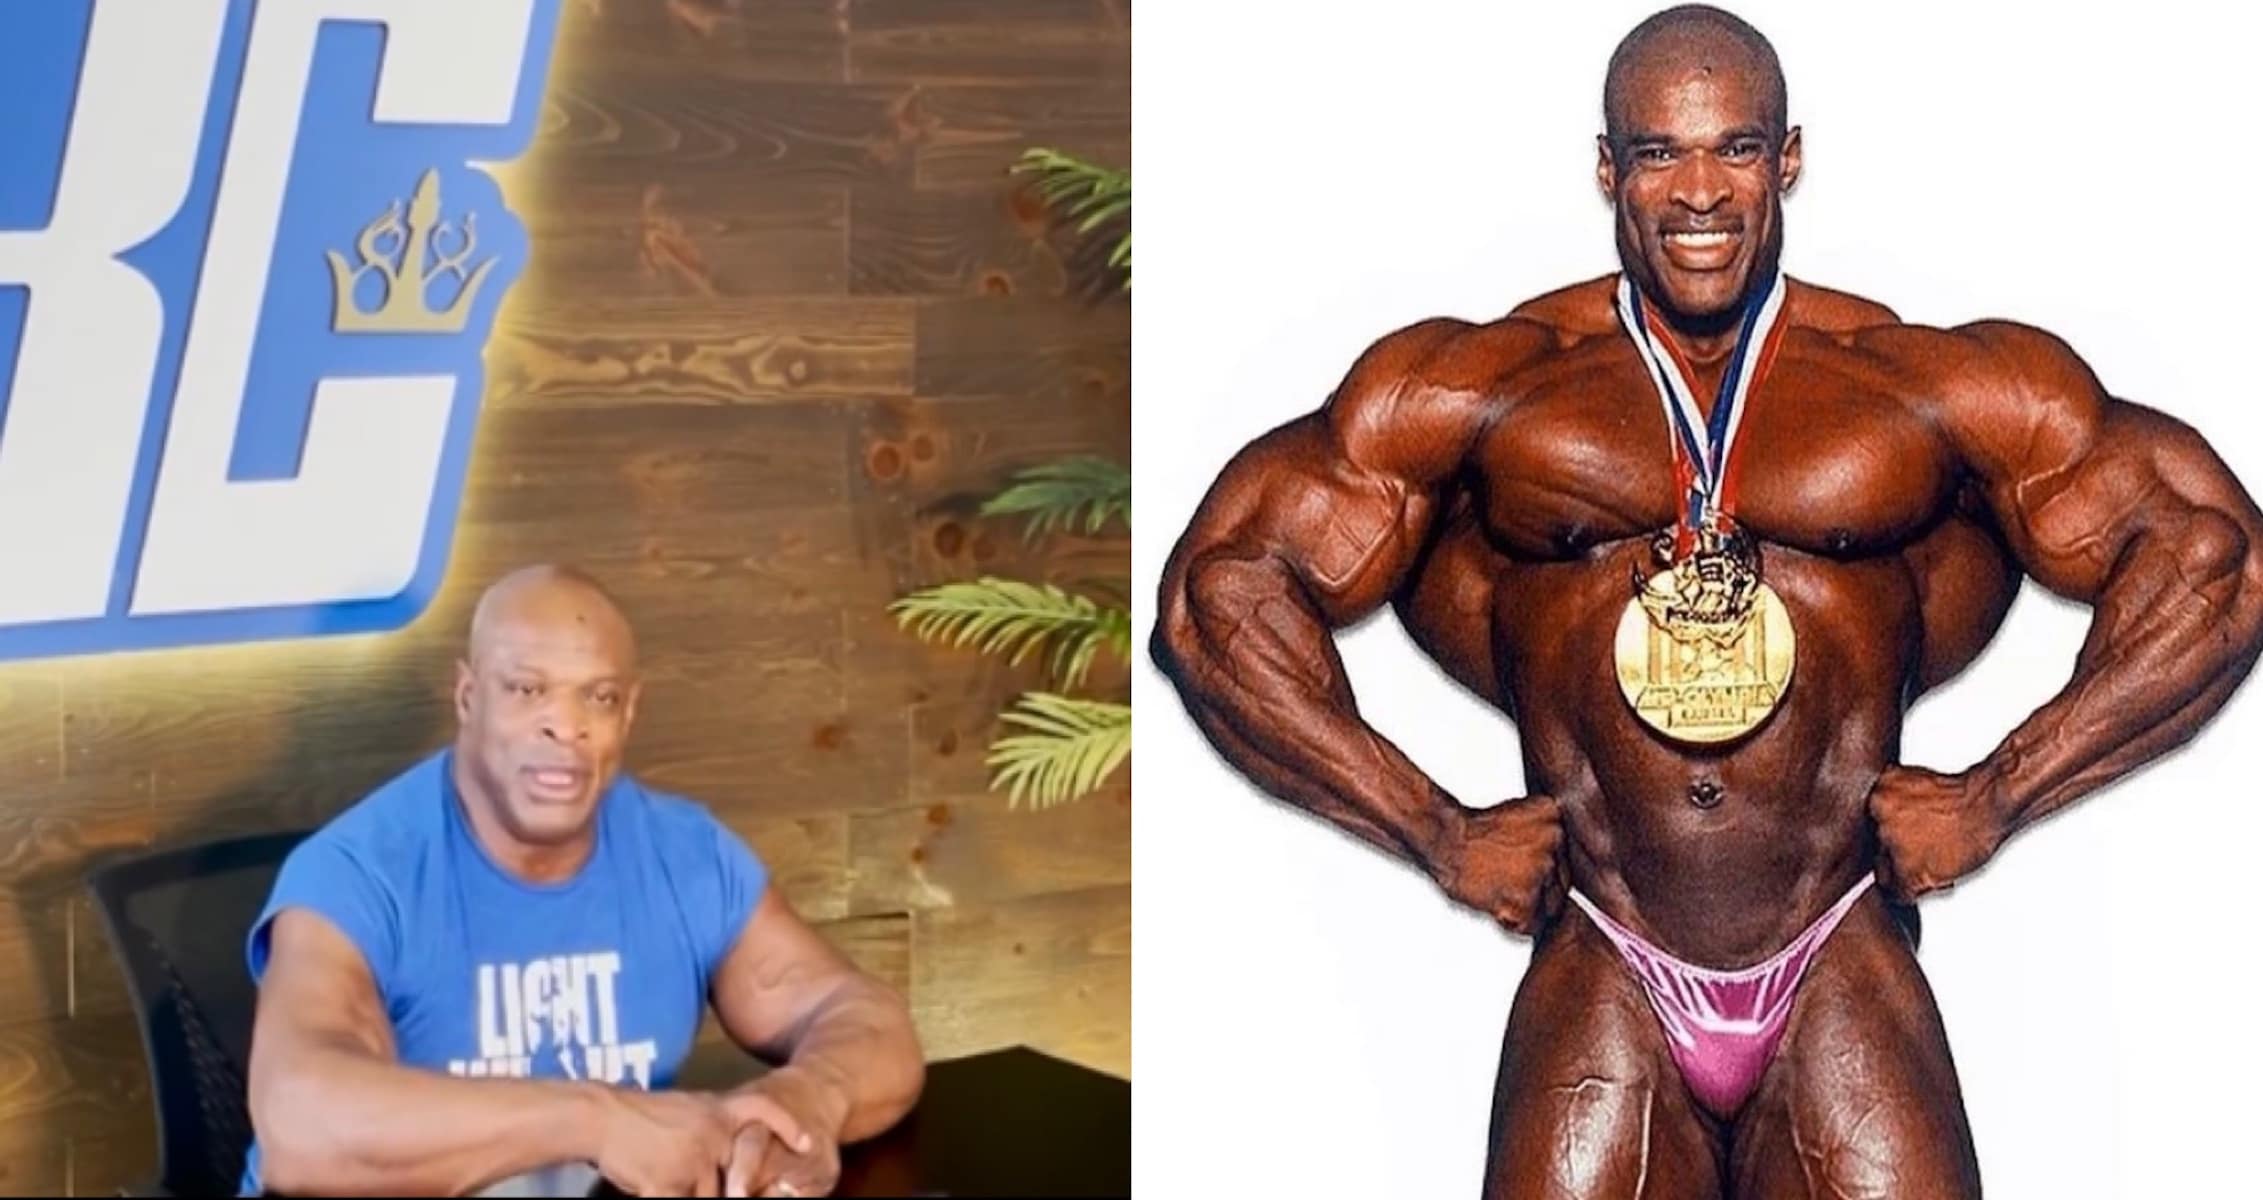 Strongest Bodybuilder Ever”: Usually Calm Ronnie Coleman Takes Fans Down  Memory Lane When His 300 Lbs Monster Self Hijacked a Press Conference -  EssentiallySports